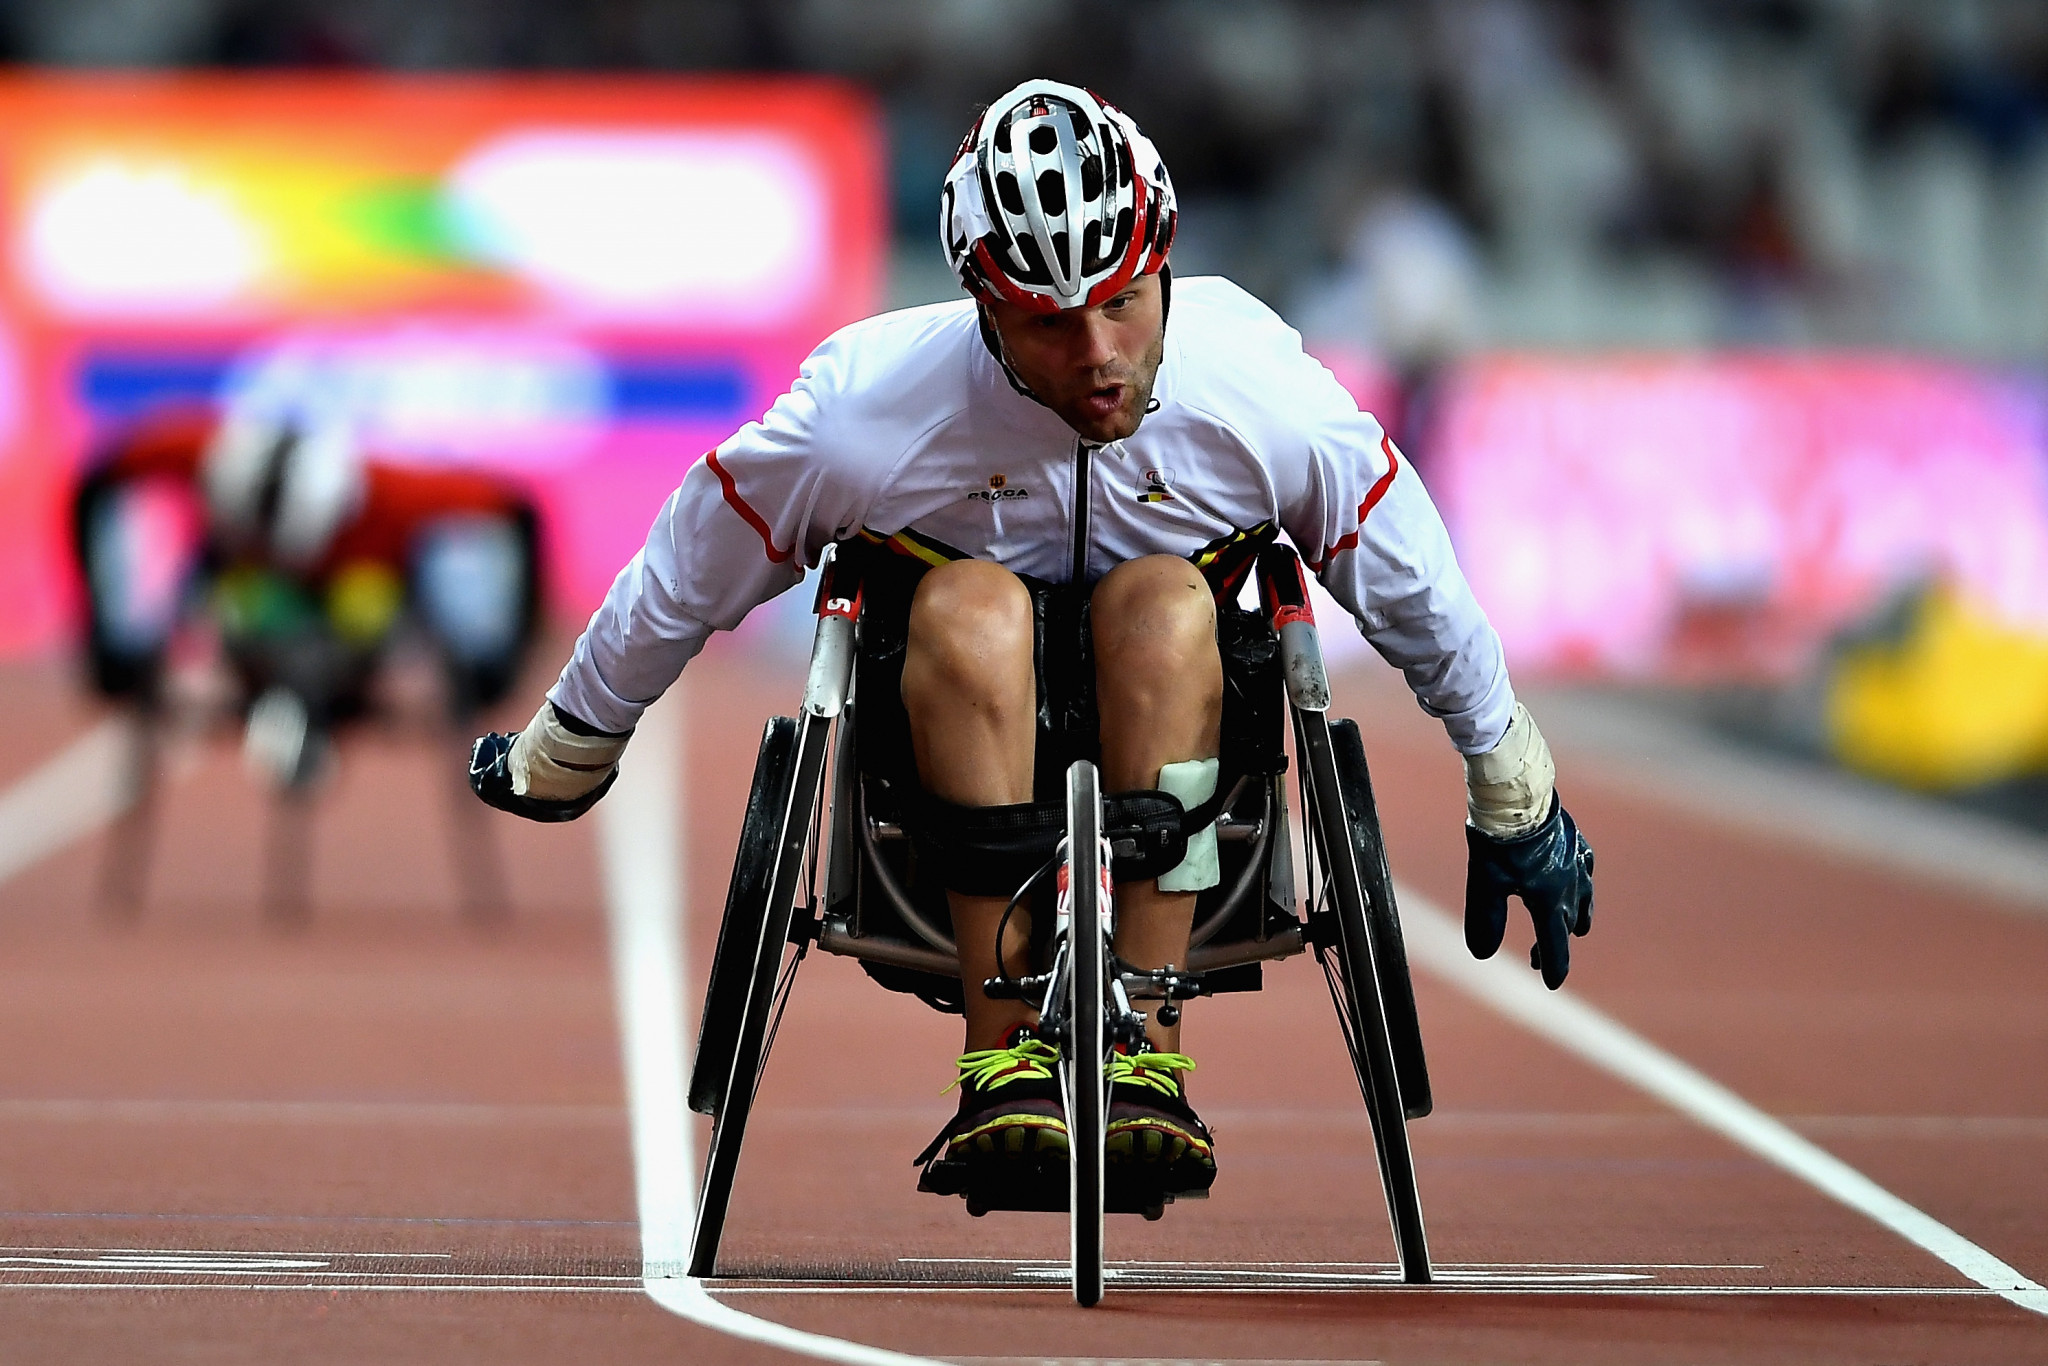 Belgium’s Peter Genyn smashed his second world record in three days as competition came to an end at the World Para Athletics Grand Prix in Nottwil in Switzerland ©Getty Images